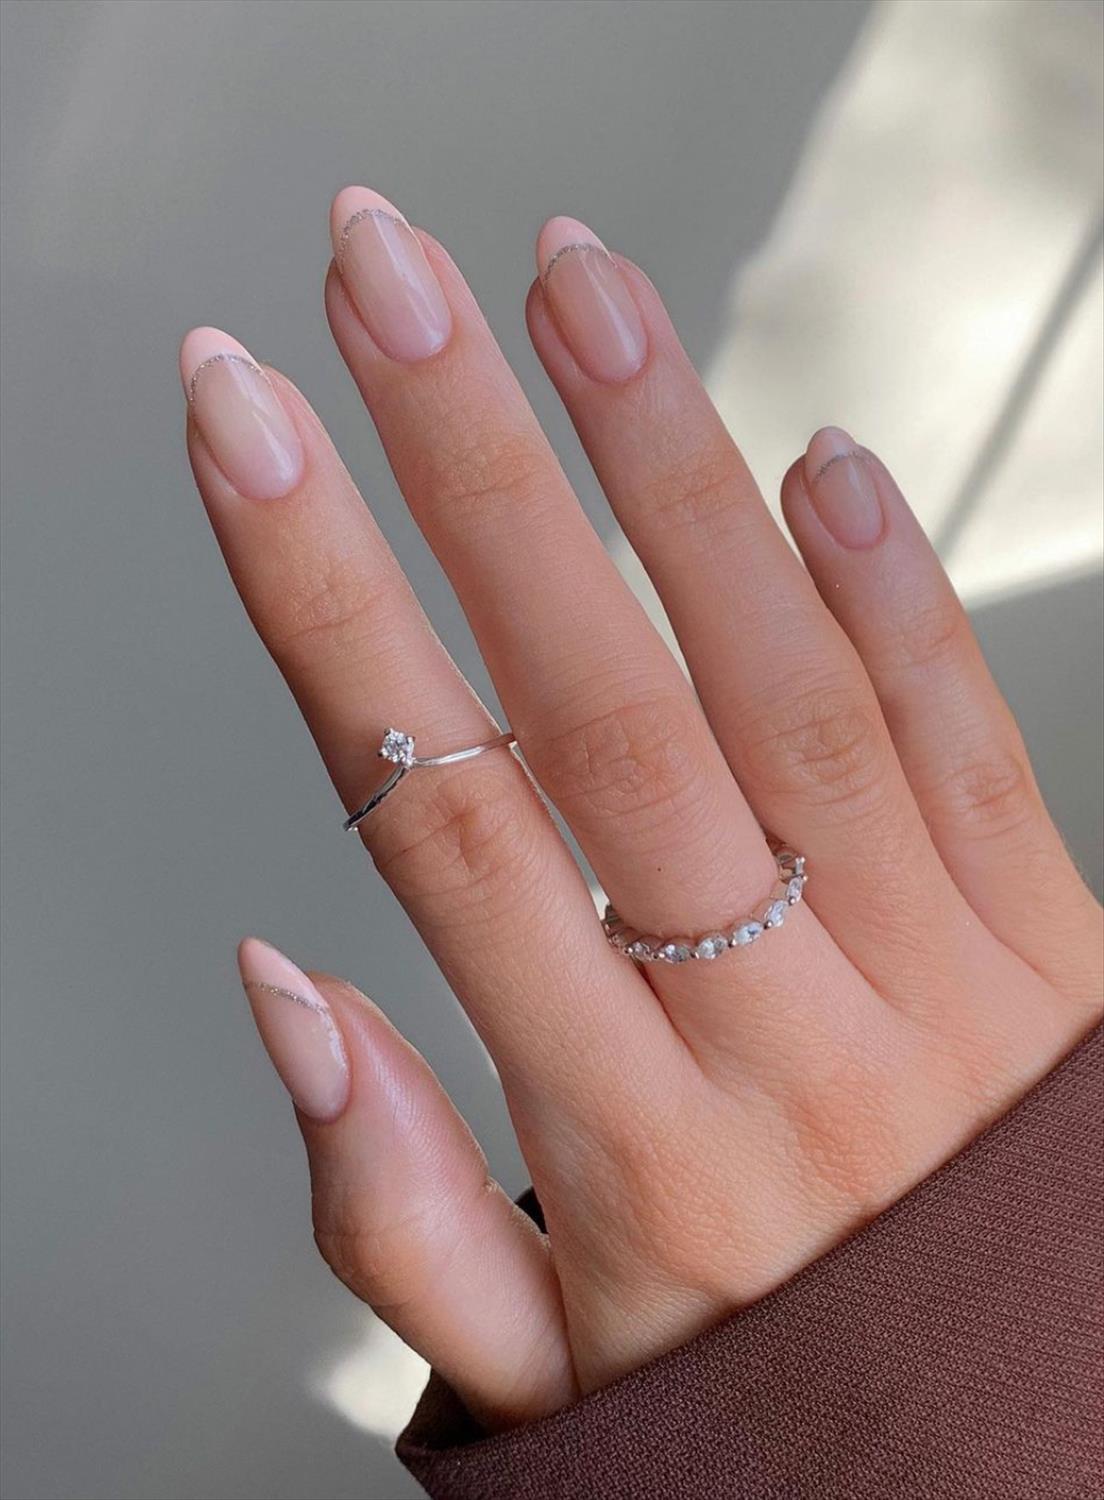 Pretty short acrylic nails ideas with oval and square nail shape